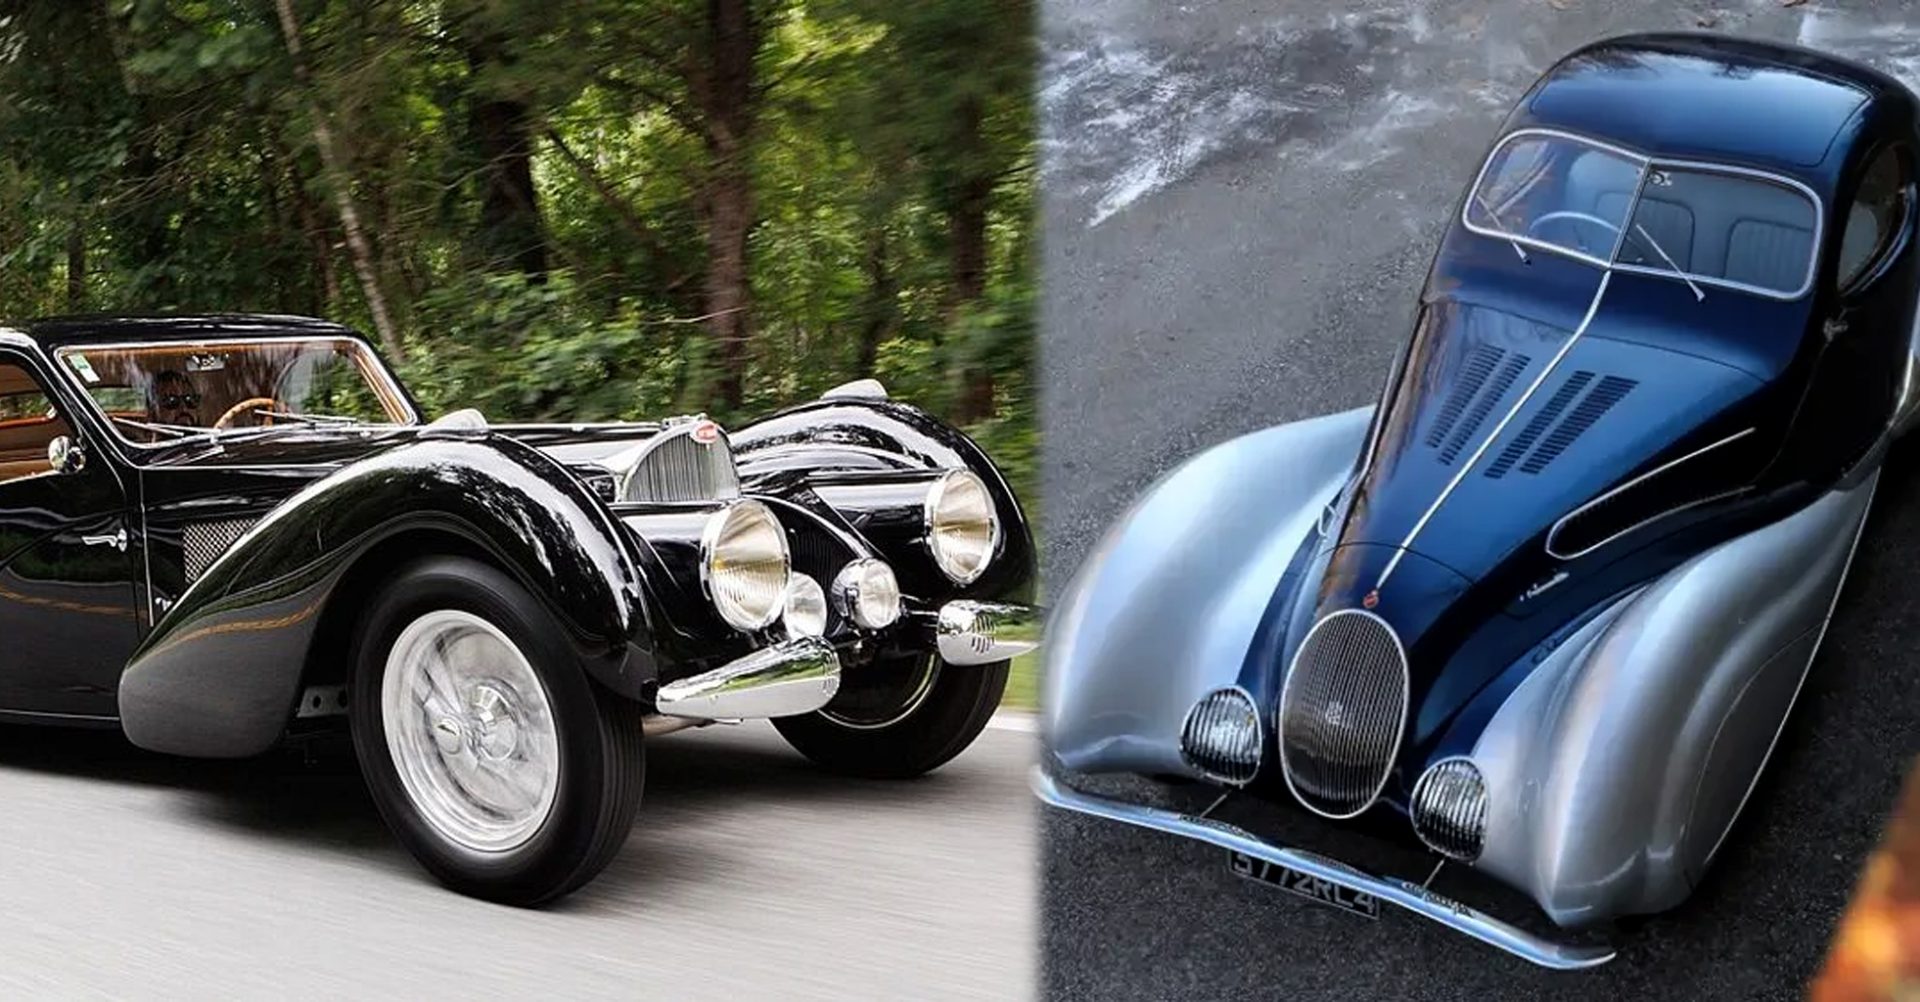 A 1937 Talbot-Lago Teardrop Coupe Led Gooding & Company’s Robust $212 Million Sales in 2022